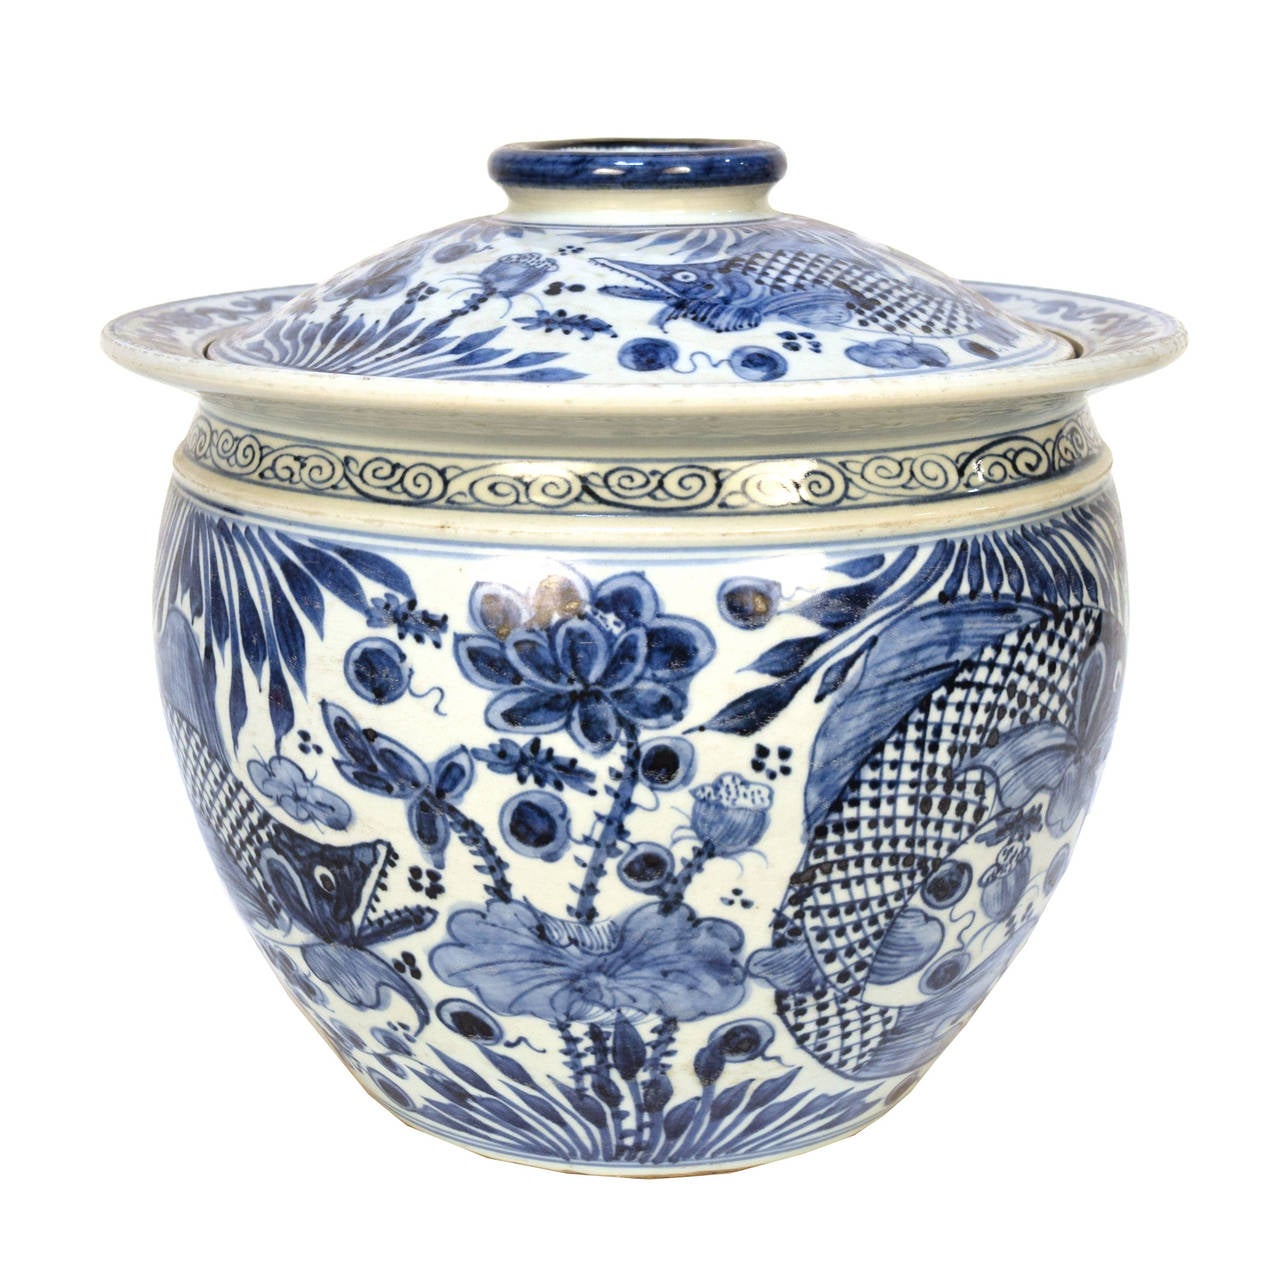 20th Century Chinese Blue and White Covered Jar with Fish